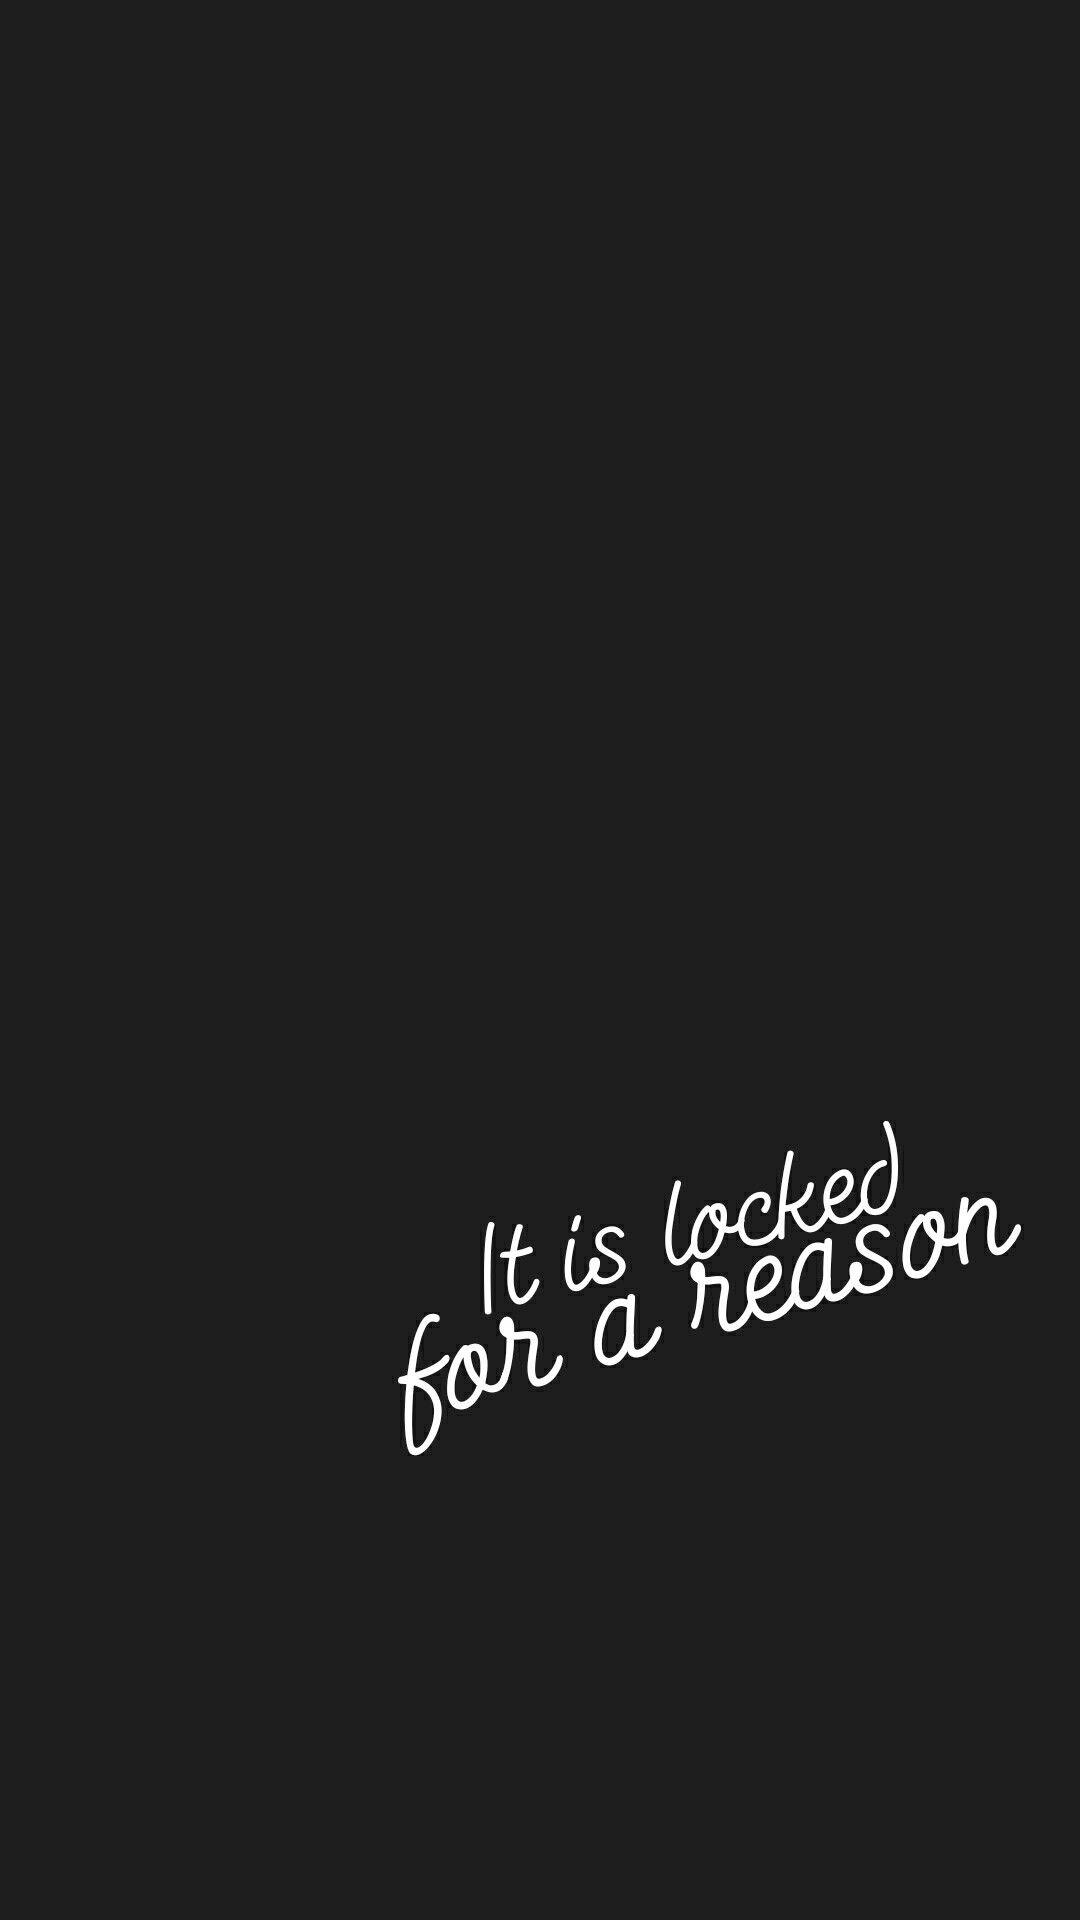 Fresh Cute Wallpaper with Quotes for Desktop. Wallpaper